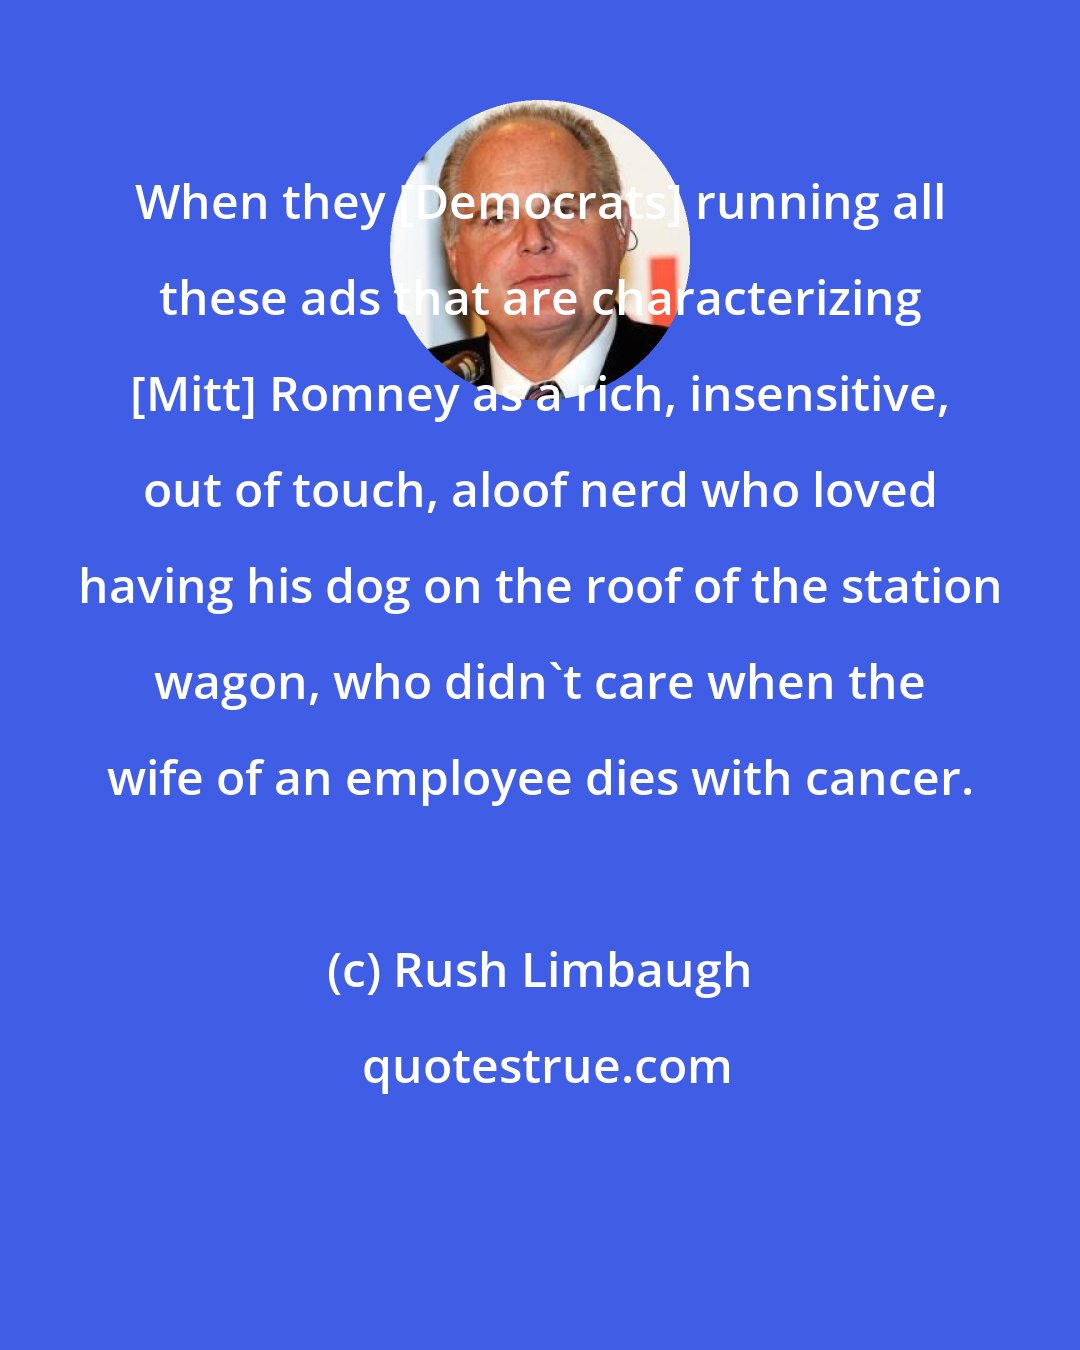 Rush Limbaugh: When they [Democrats] running all these ads that are characterizing [Mitt] Romney as a rich, insensitive, out of touch, aloof nerd who loved having his dog on the roof of the station wagon, who didn't care when the wife of an employee dies with cancer.